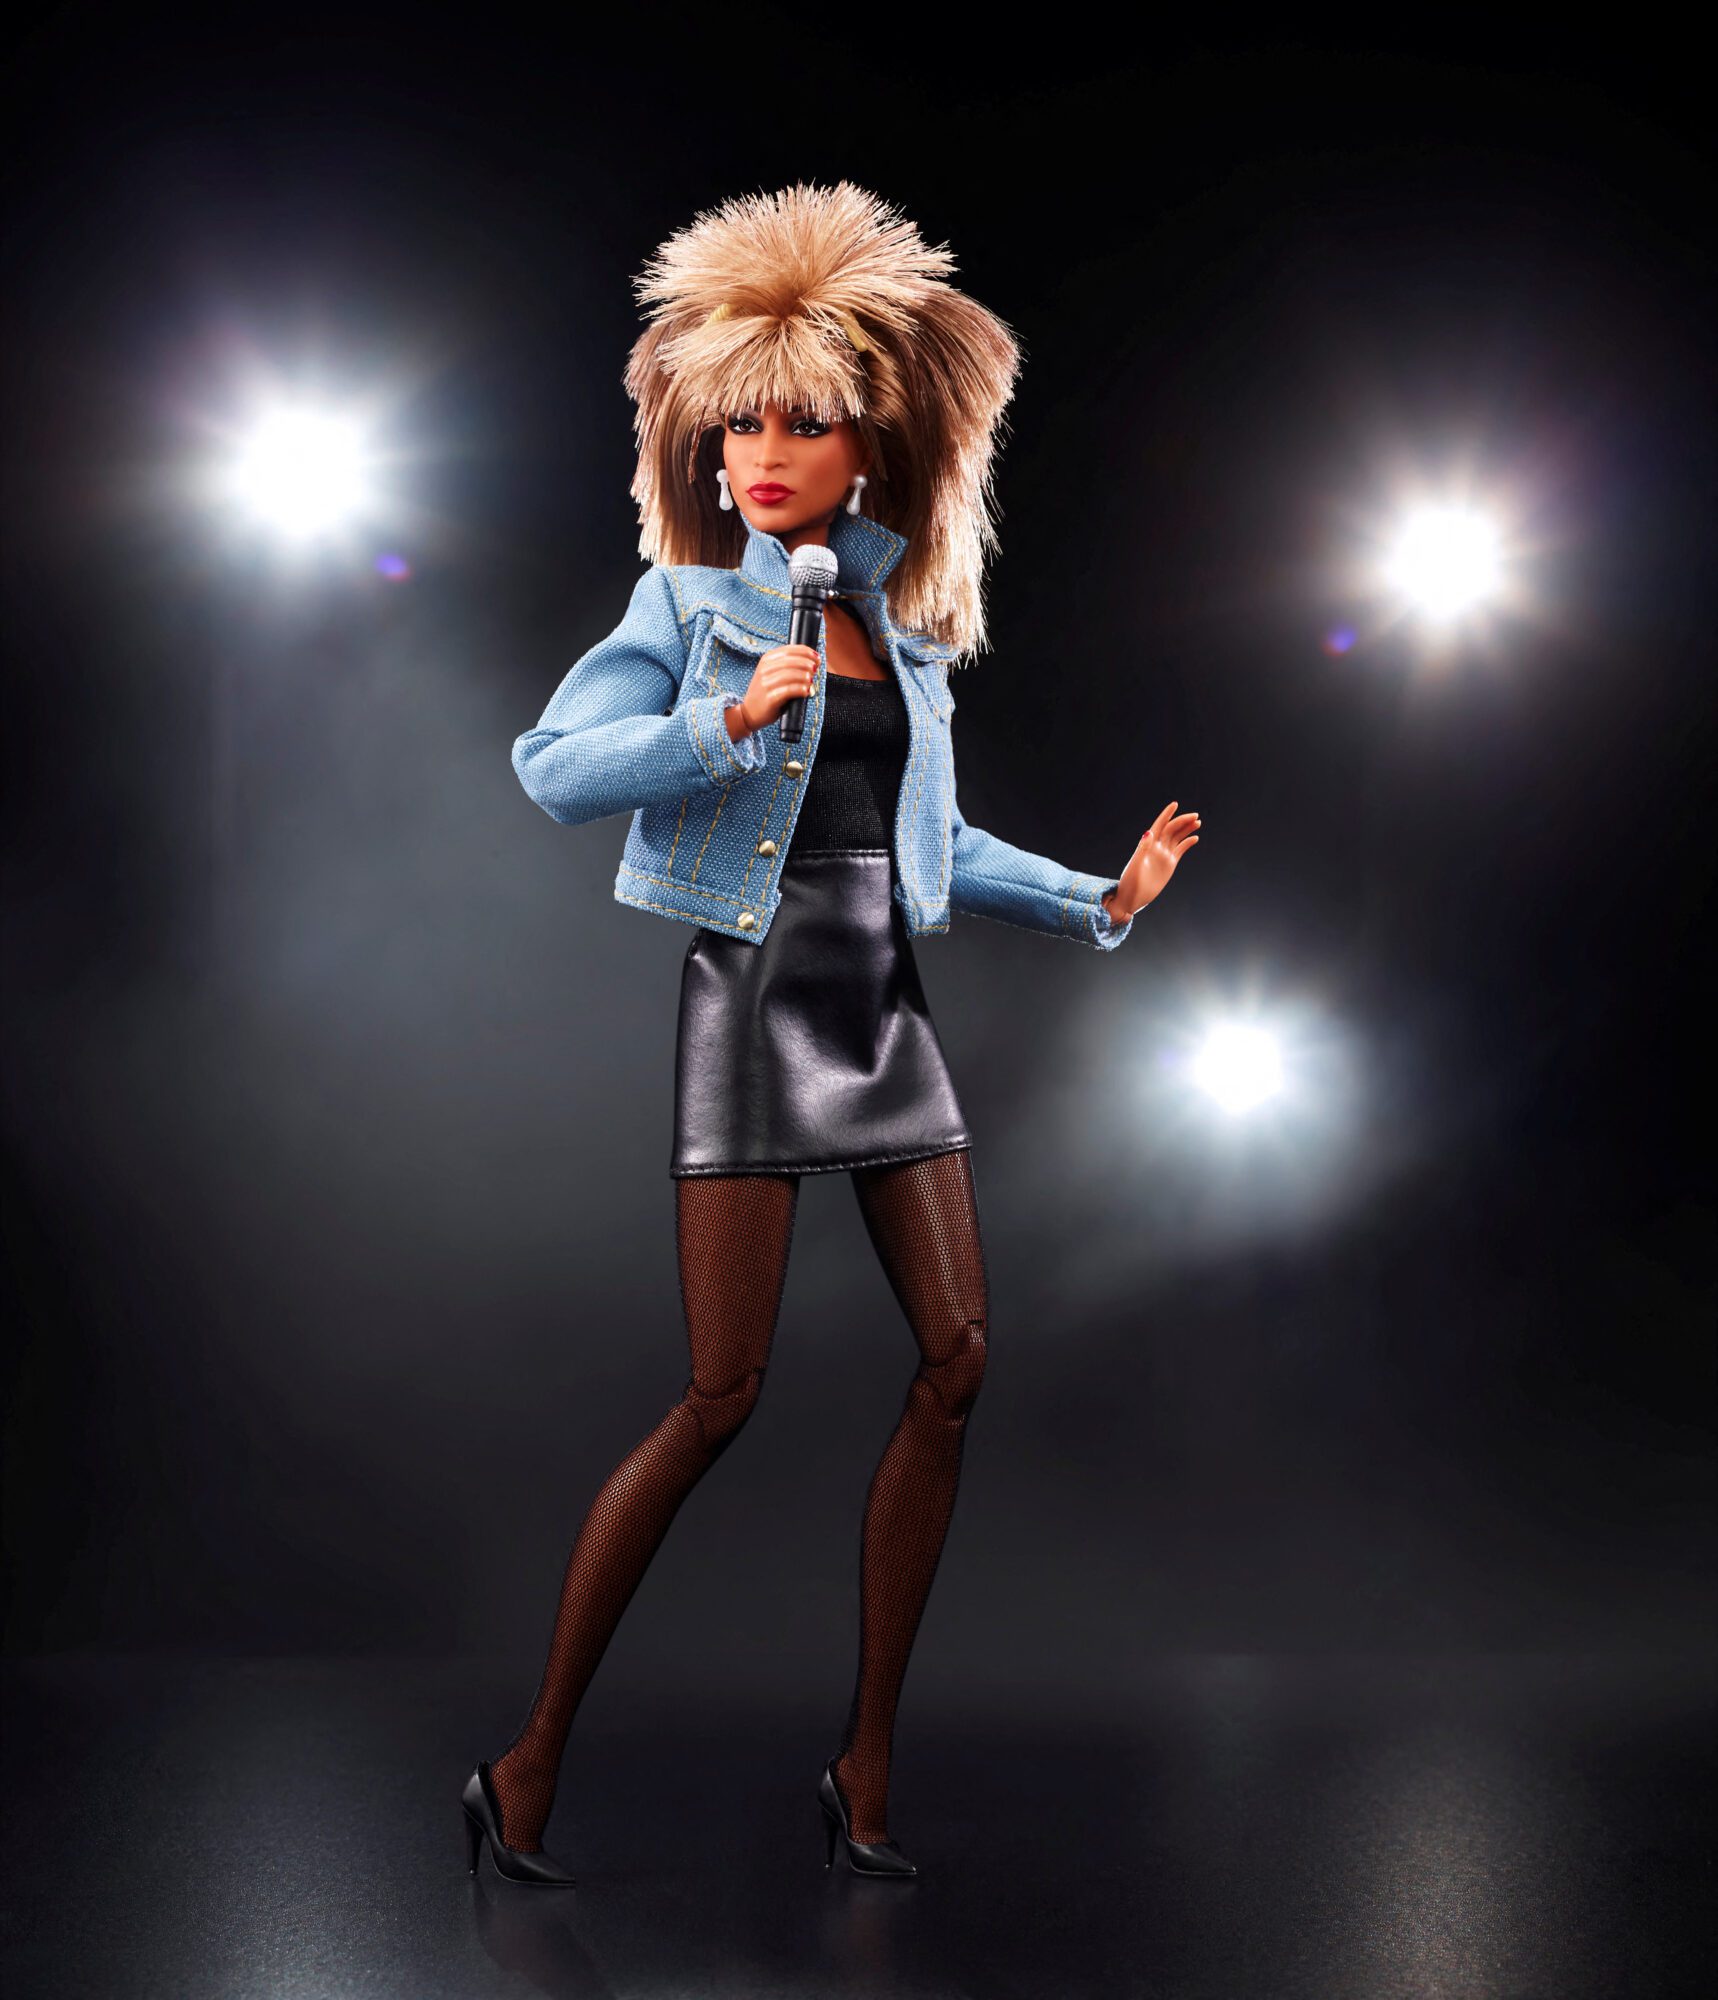 Picture of a Barbie doll created by Mattel resembling singer Tina Turner due to the celebration of the 40th anniversary of her hit song, in this image obtained by REUTERS on October 13, 2022.